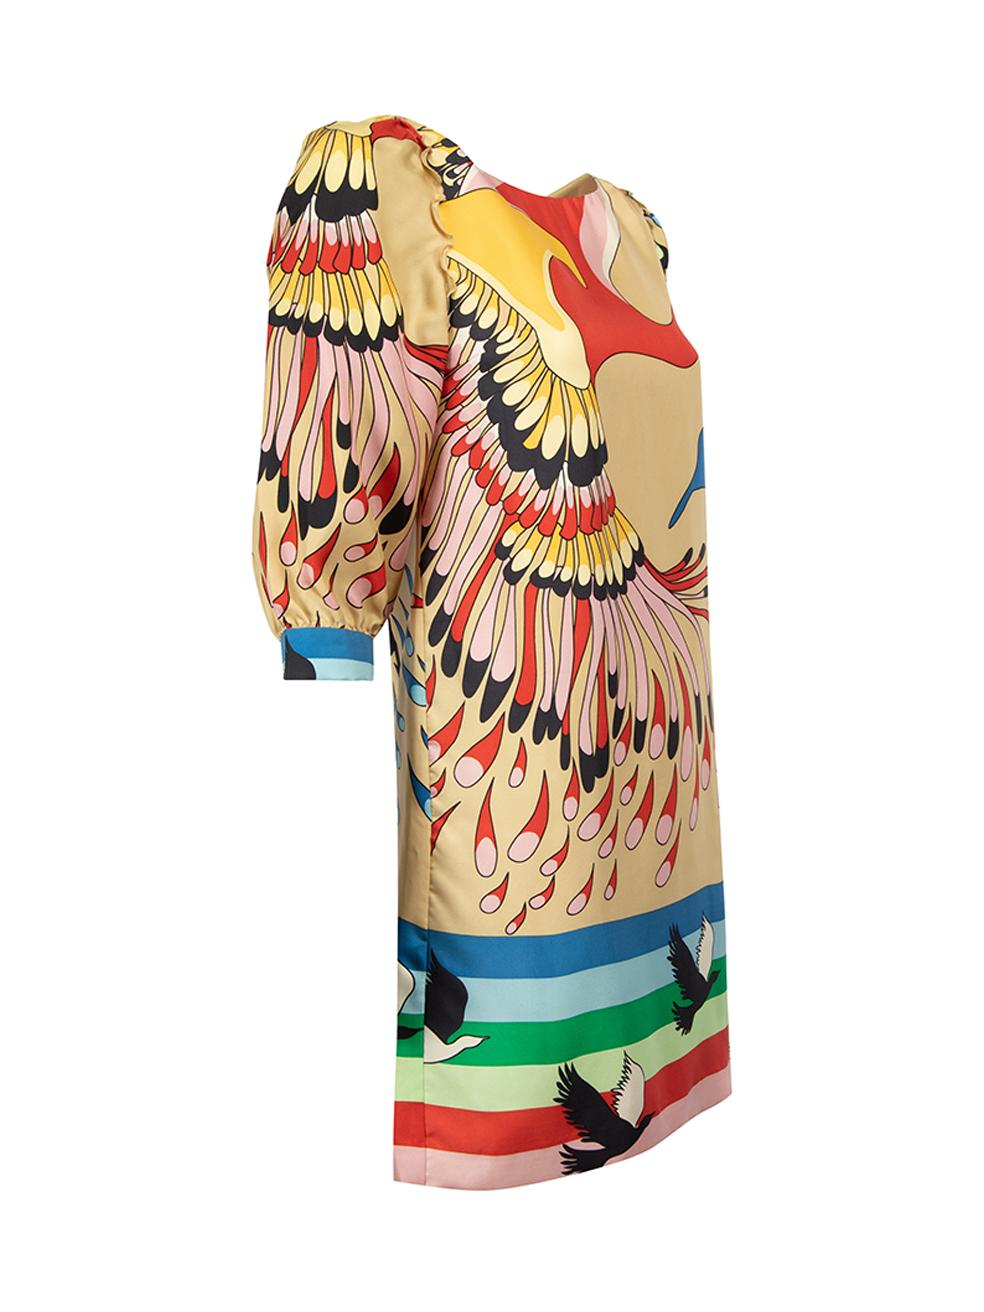 CONDITION is Never worn, with tags. No visible wear to top is evident on this new Tibi designer resale item. 



Details


Multicolour

Silk 

Bright printed patterns

Oversized fit

3/4 length sleeves

Large round neckline





Made in